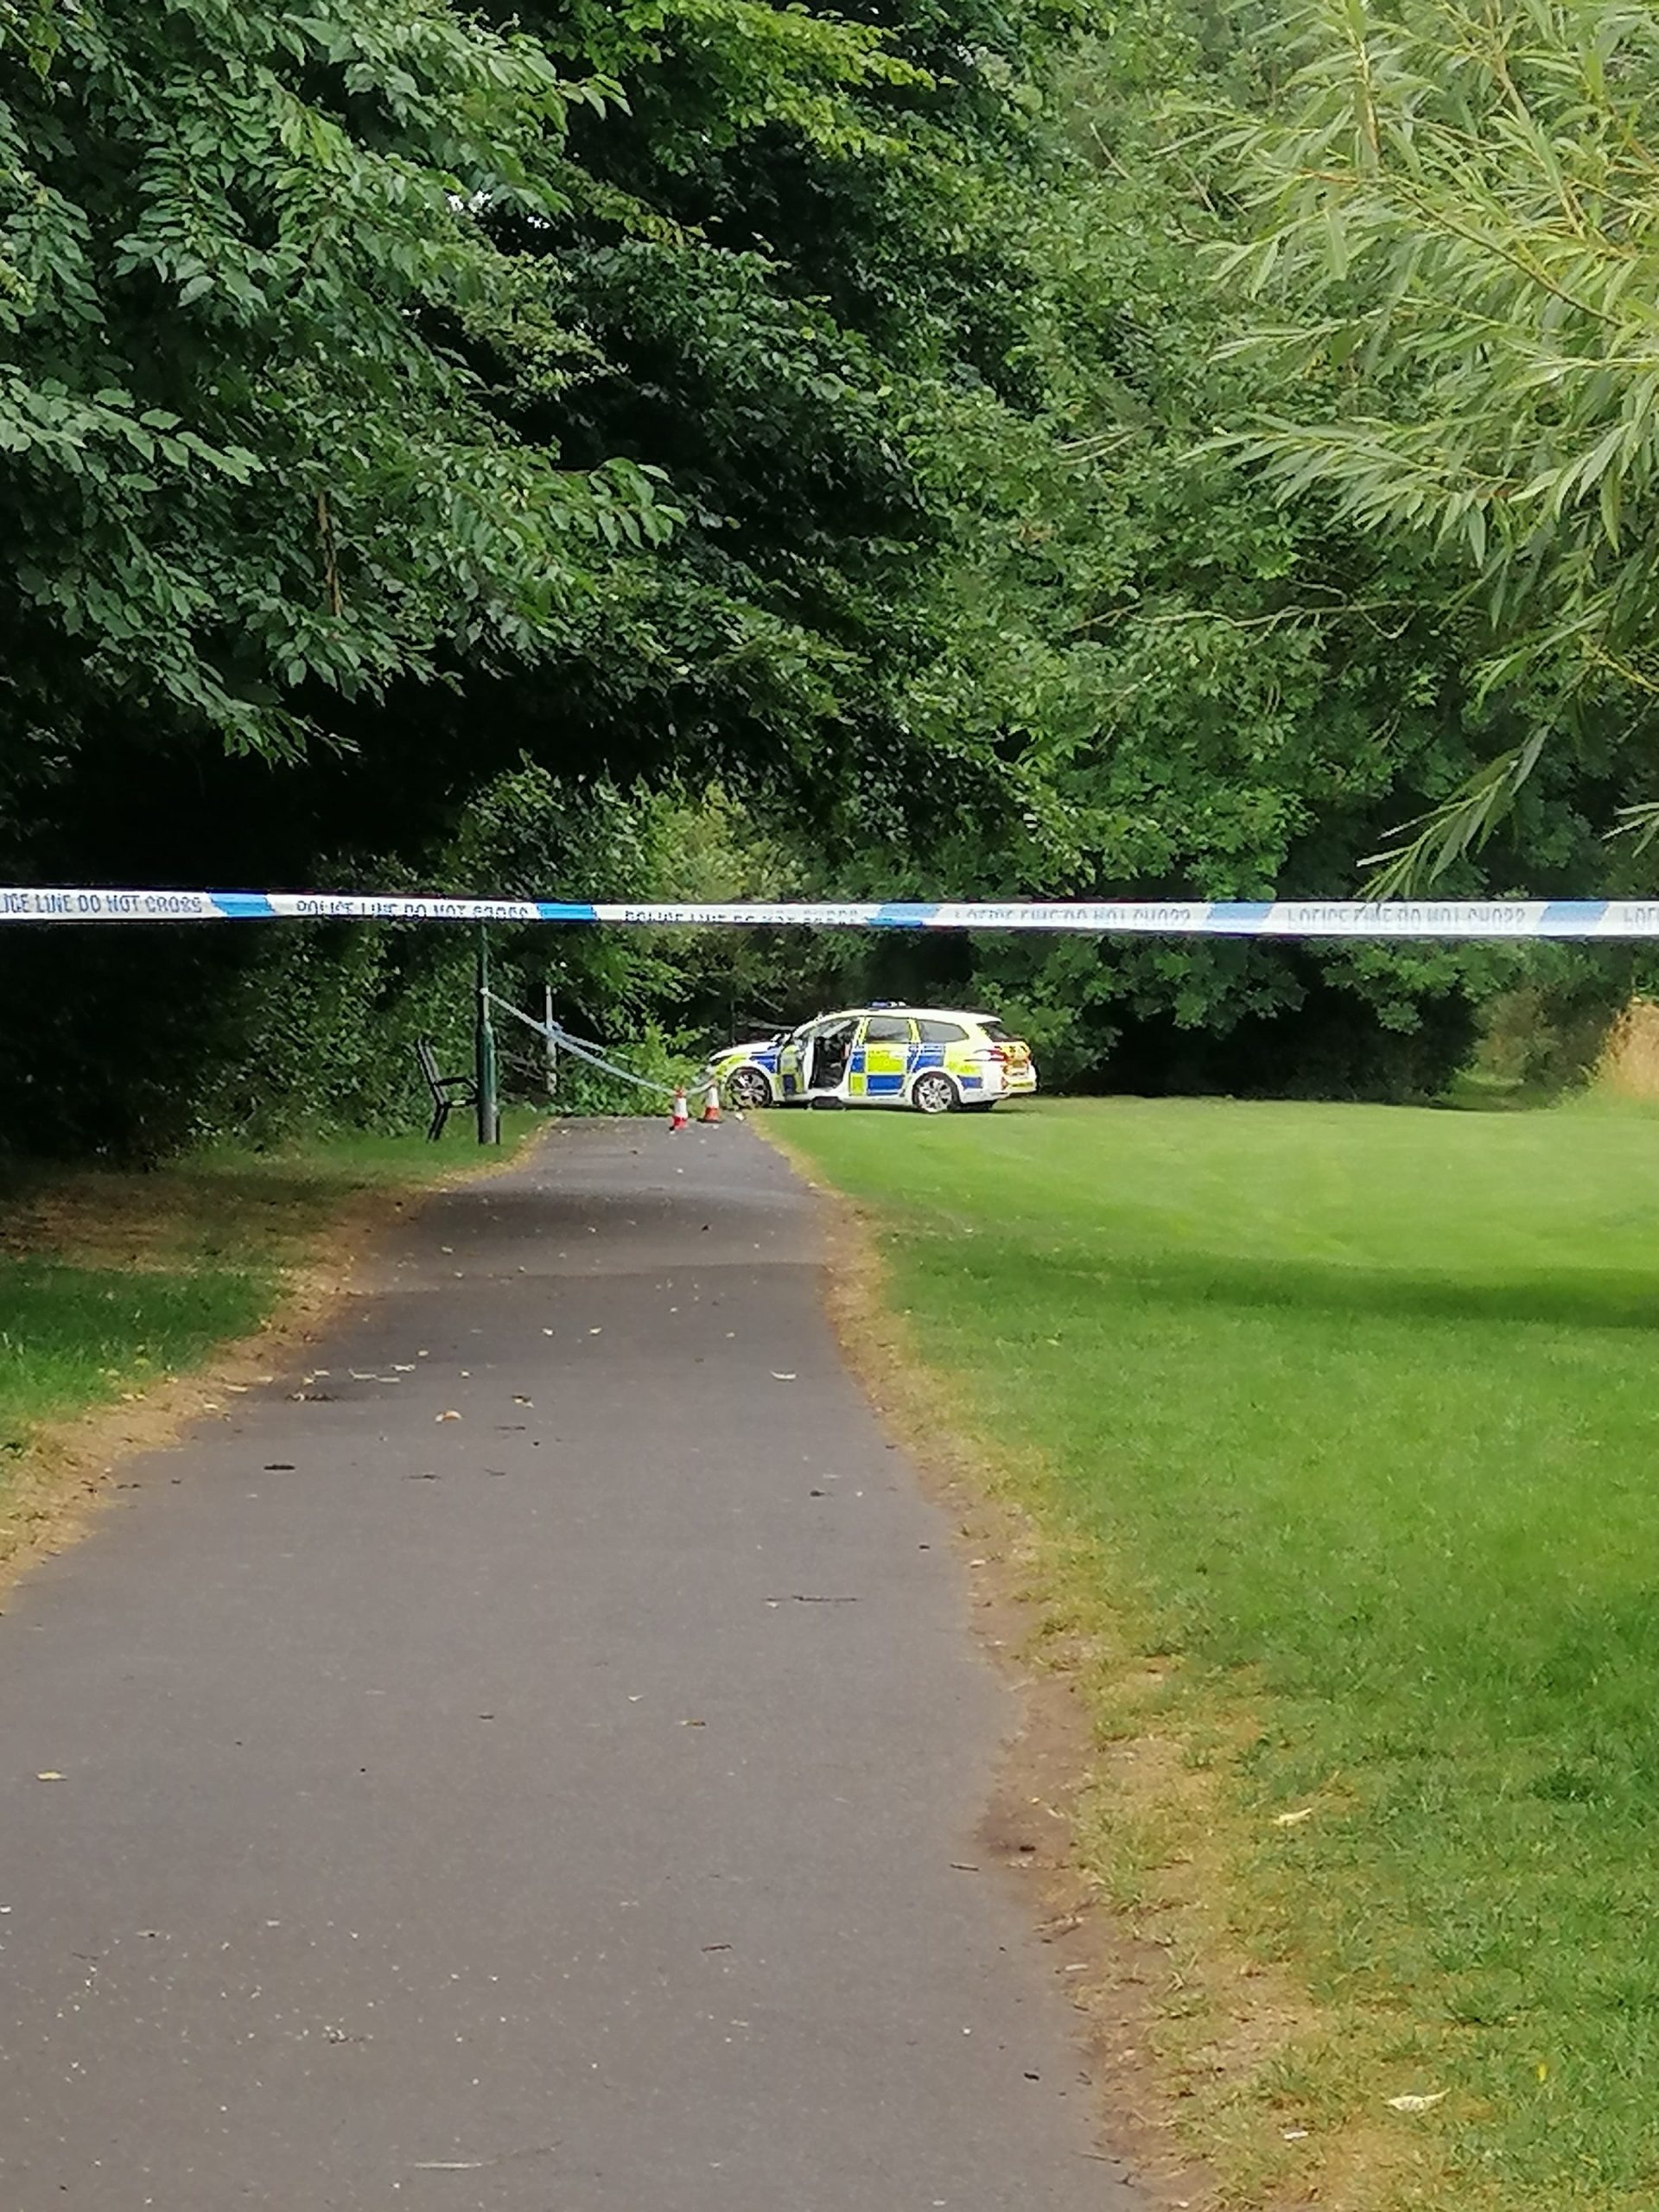 NEWS | Police are appealing for witnesses following reports that a woman was raped in Hereford